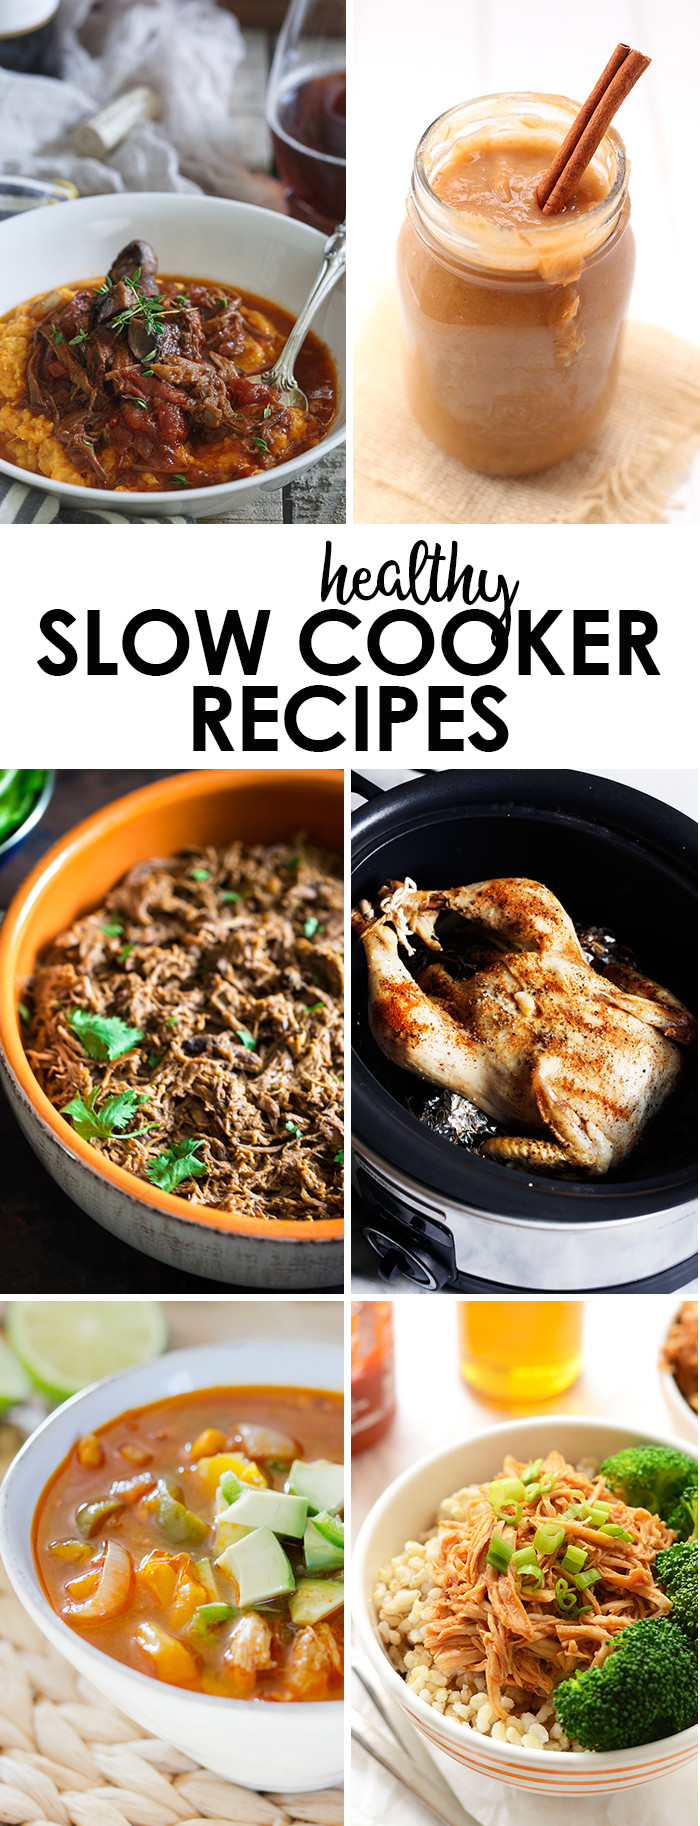 Slow Cooker Healthy Chicken Recipes
 5 Ingre nt Honey Sriracha Slow Cooker Chicken Fit